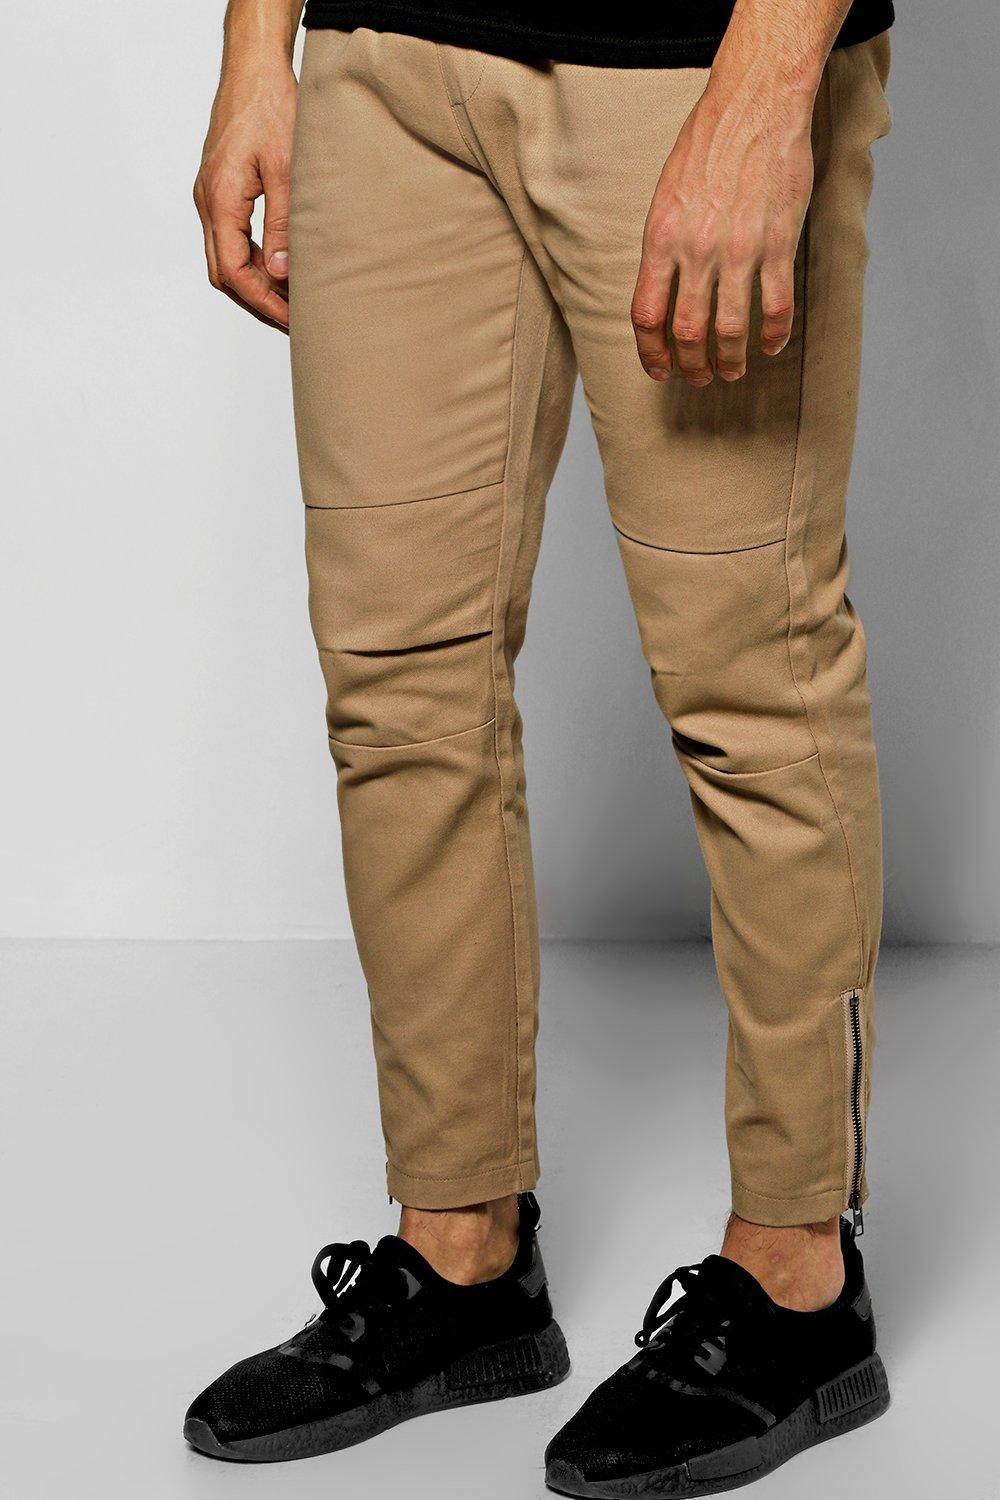 Men's Trousers - Slim, Chinos, Cargo, Smart Trousers - boohooMAN